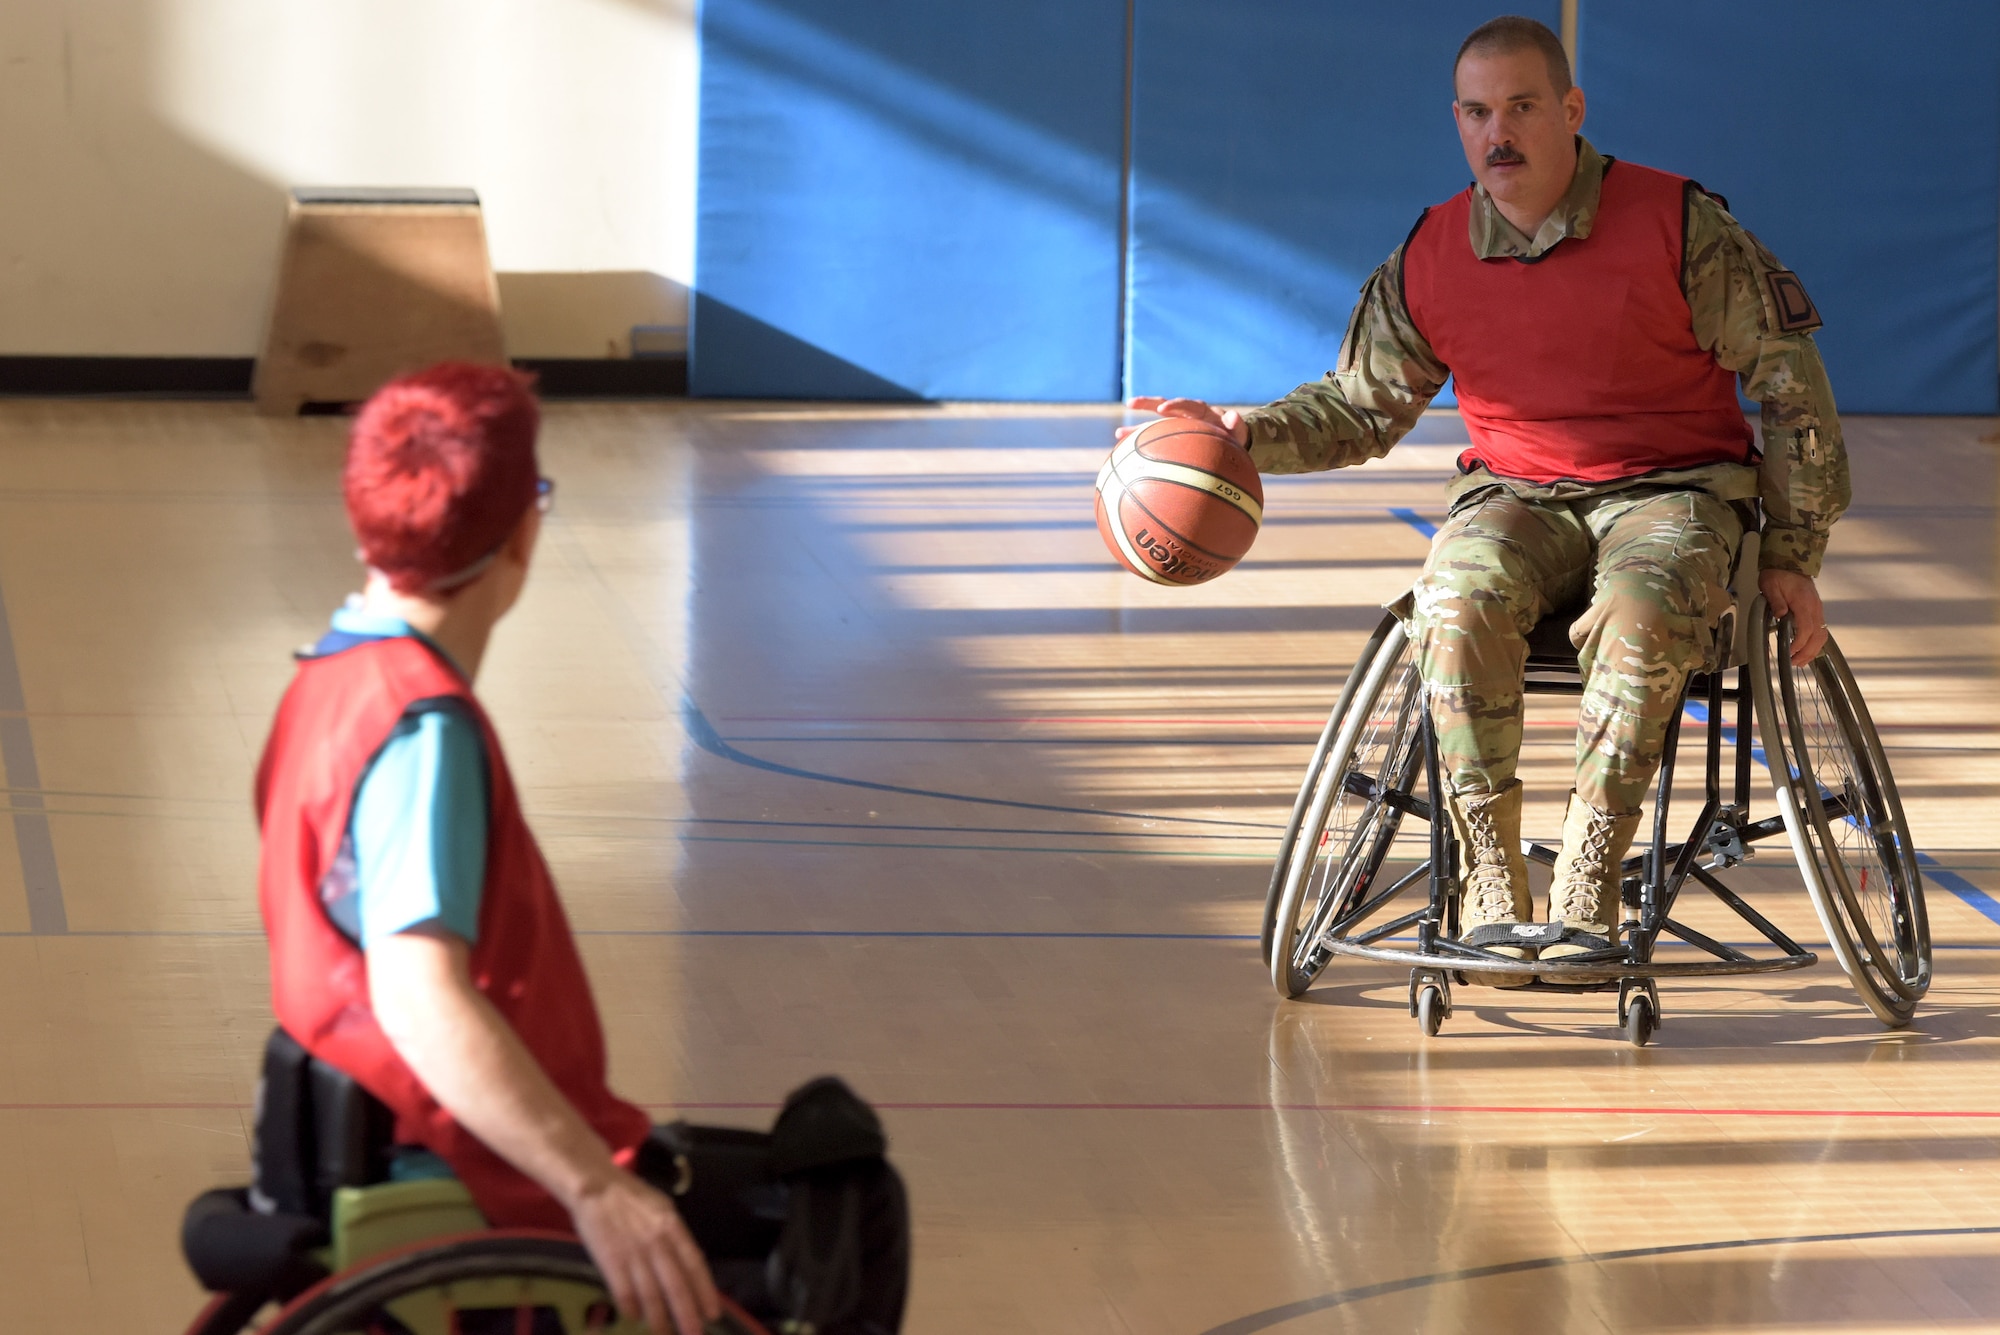 Col. Robert Shelton, 100th Operations Group commander, dribbles a basketball during a wheelchair basketball event at RAF Mildenhall, England, Oct. 30, 2019. The event was part of National Disability Employment Awareness Month which aims to help increase employment and advancement opportunities for those with disabilities through awareness. (U.S. Air Force photo by Senior Airman Benjamin Cooper)